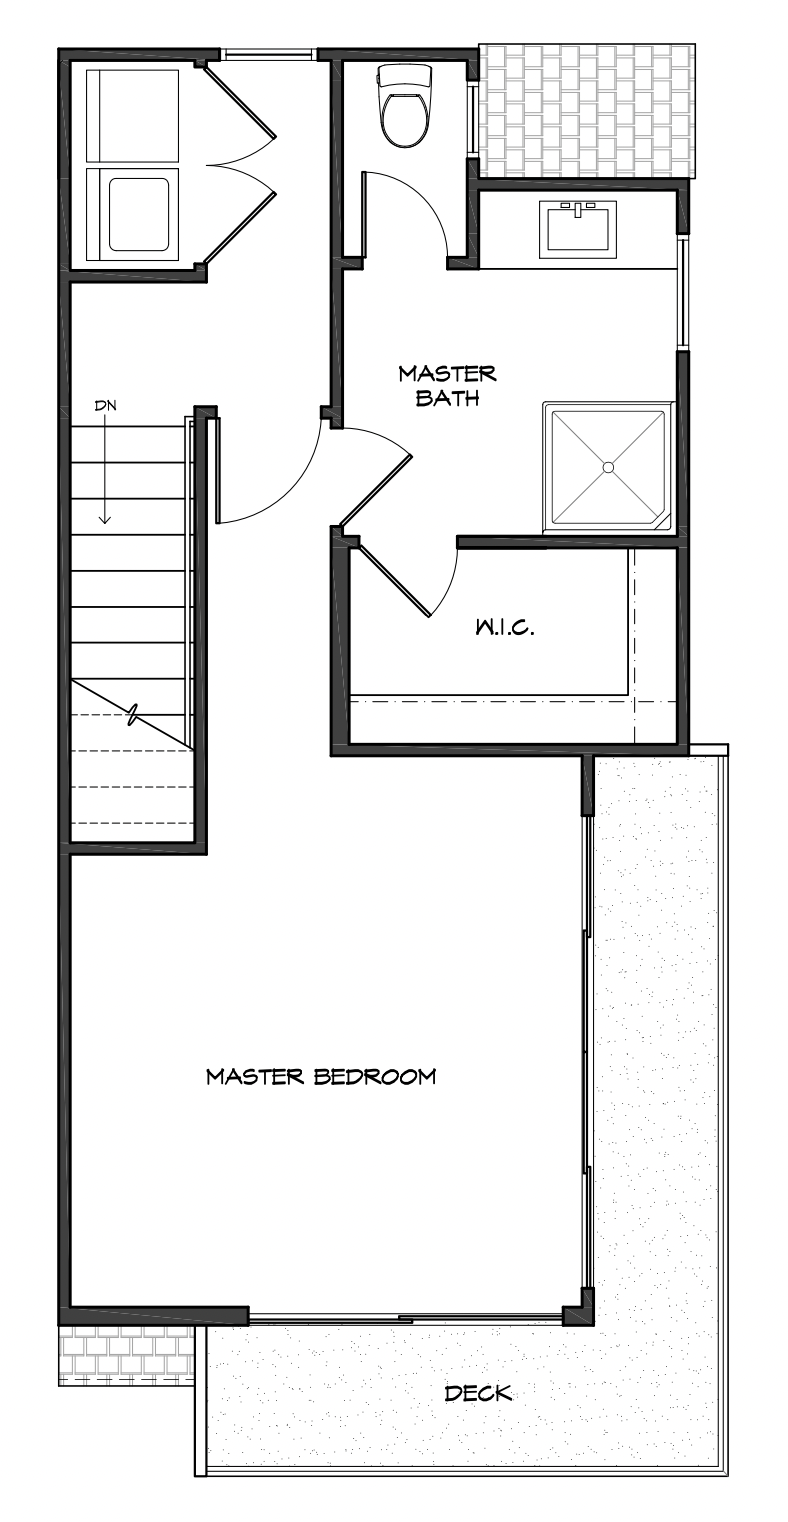 Real Estate Floor Plan Reference for Virtual Tour: Third Floor